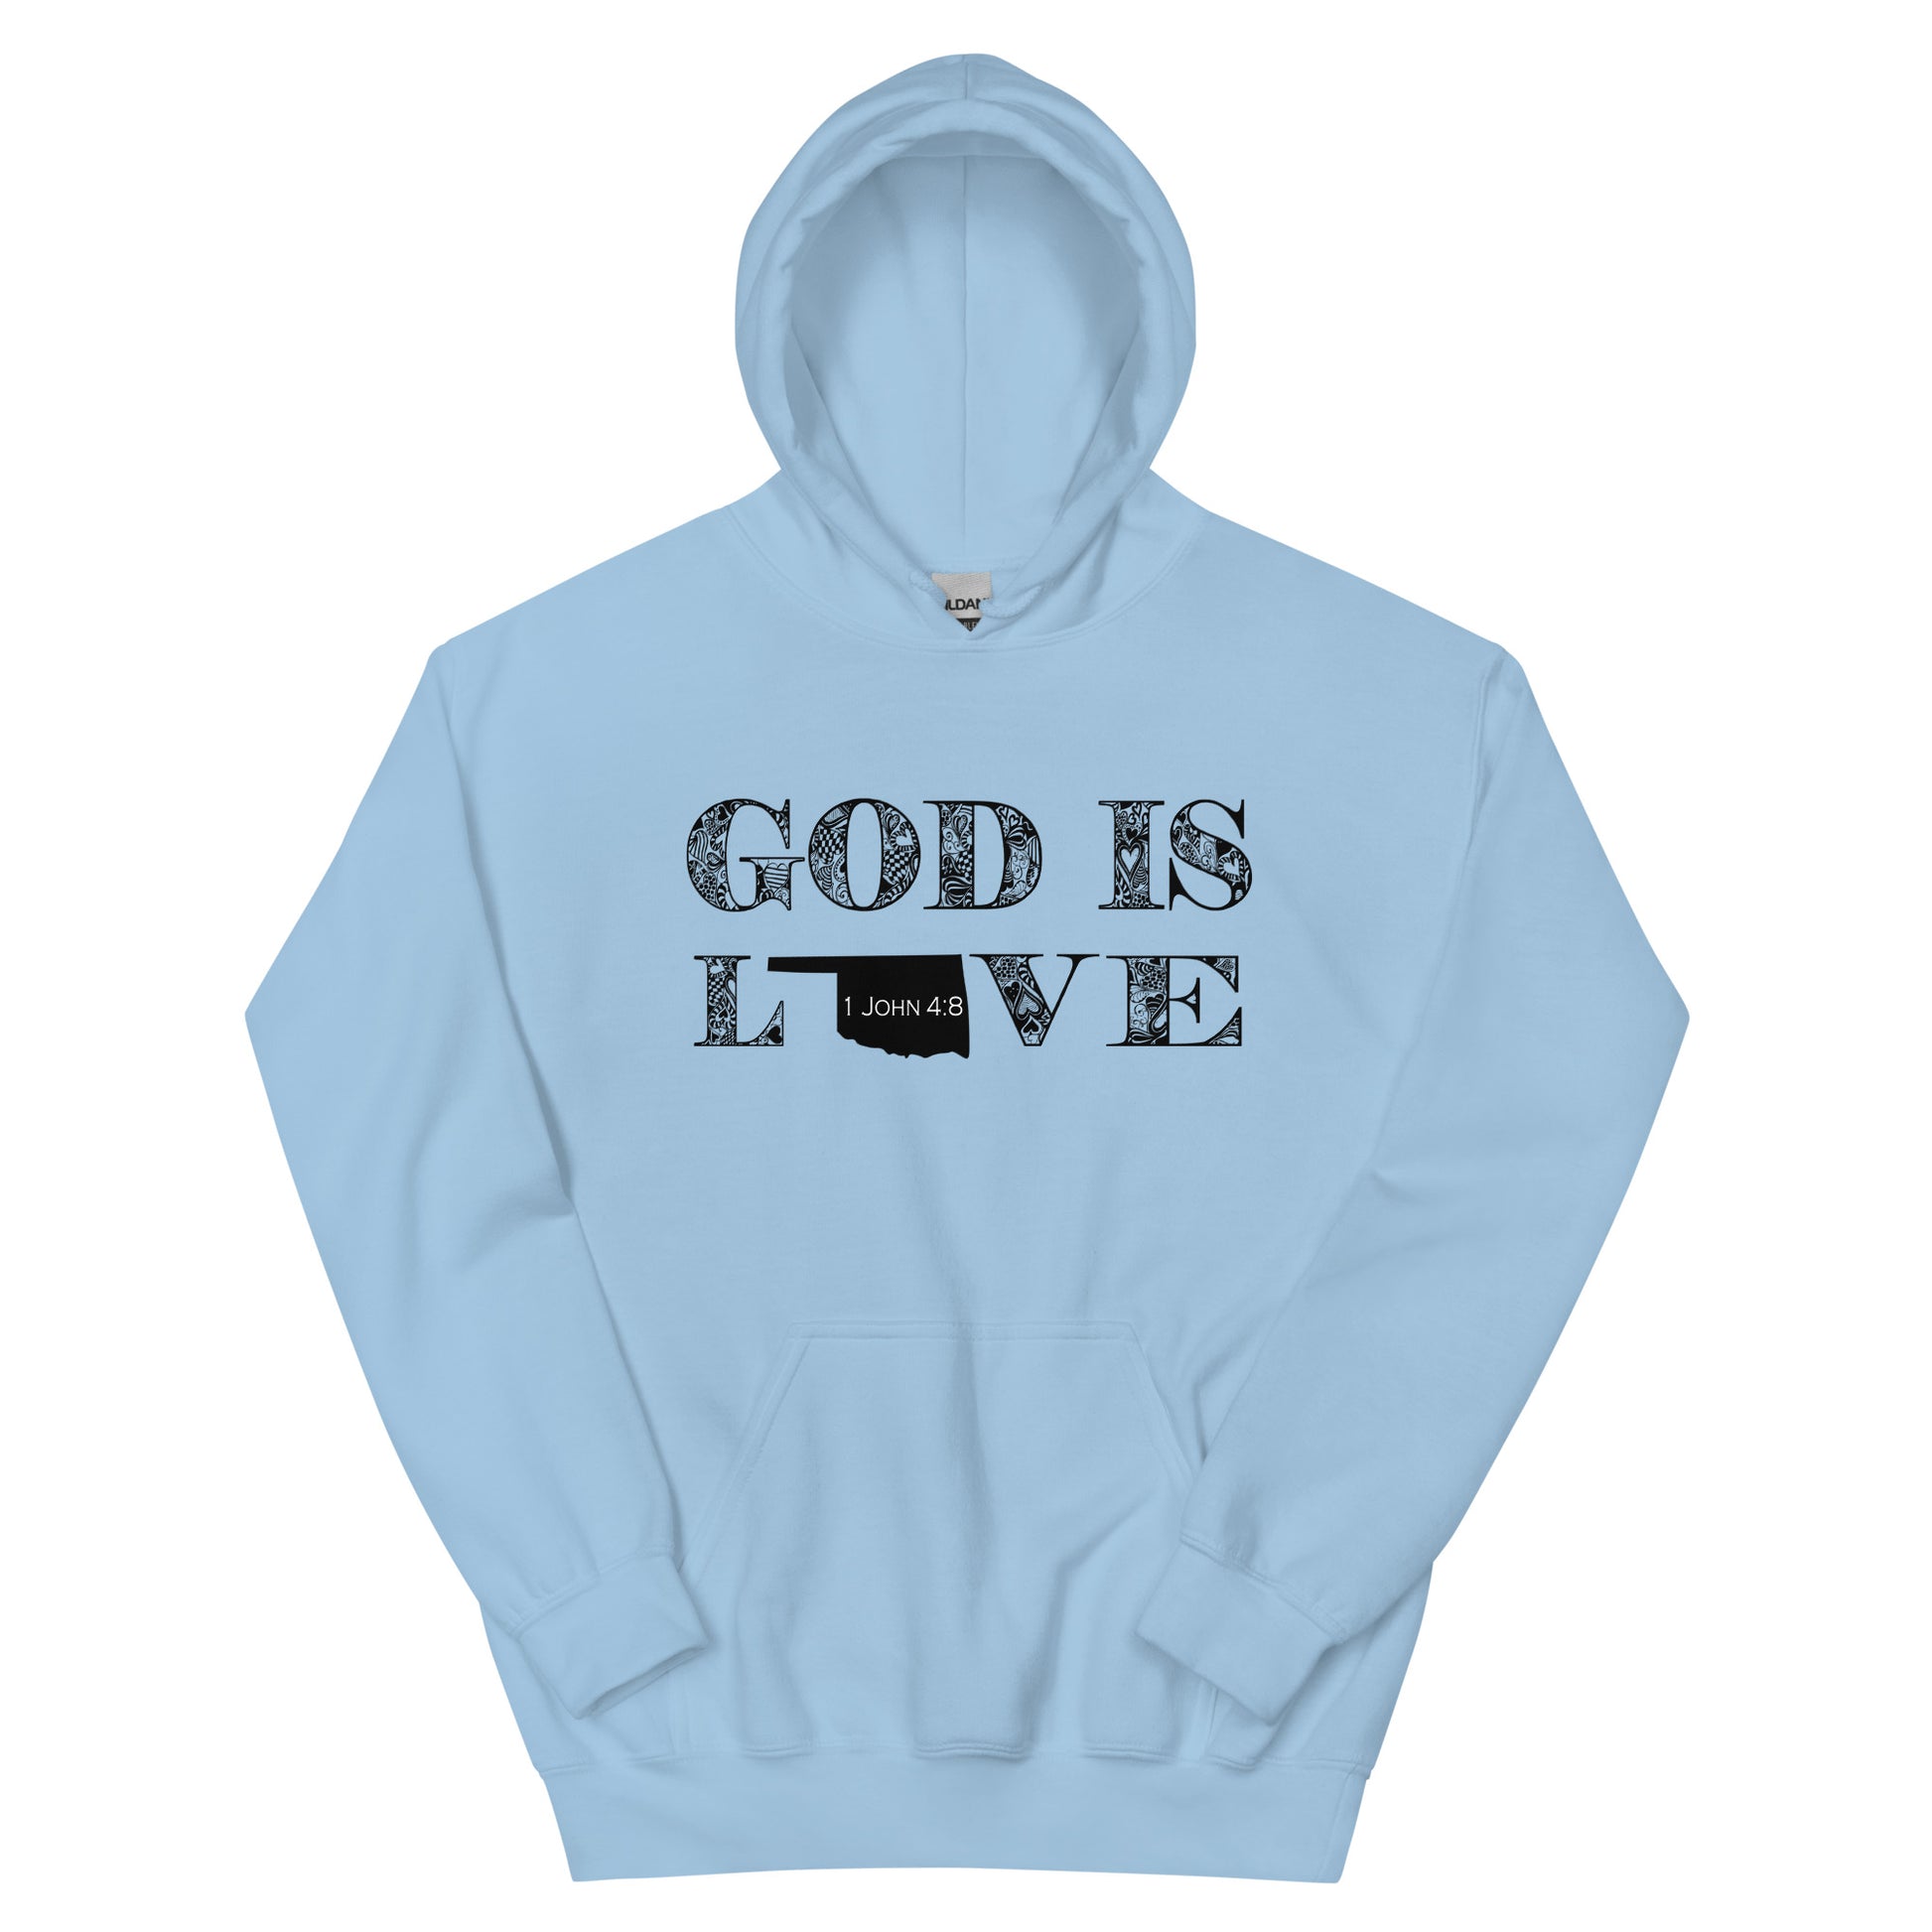 1 John 4:8 God Is Love Unisex Oklahoma Hoodie in Light Blue - front view with hood up